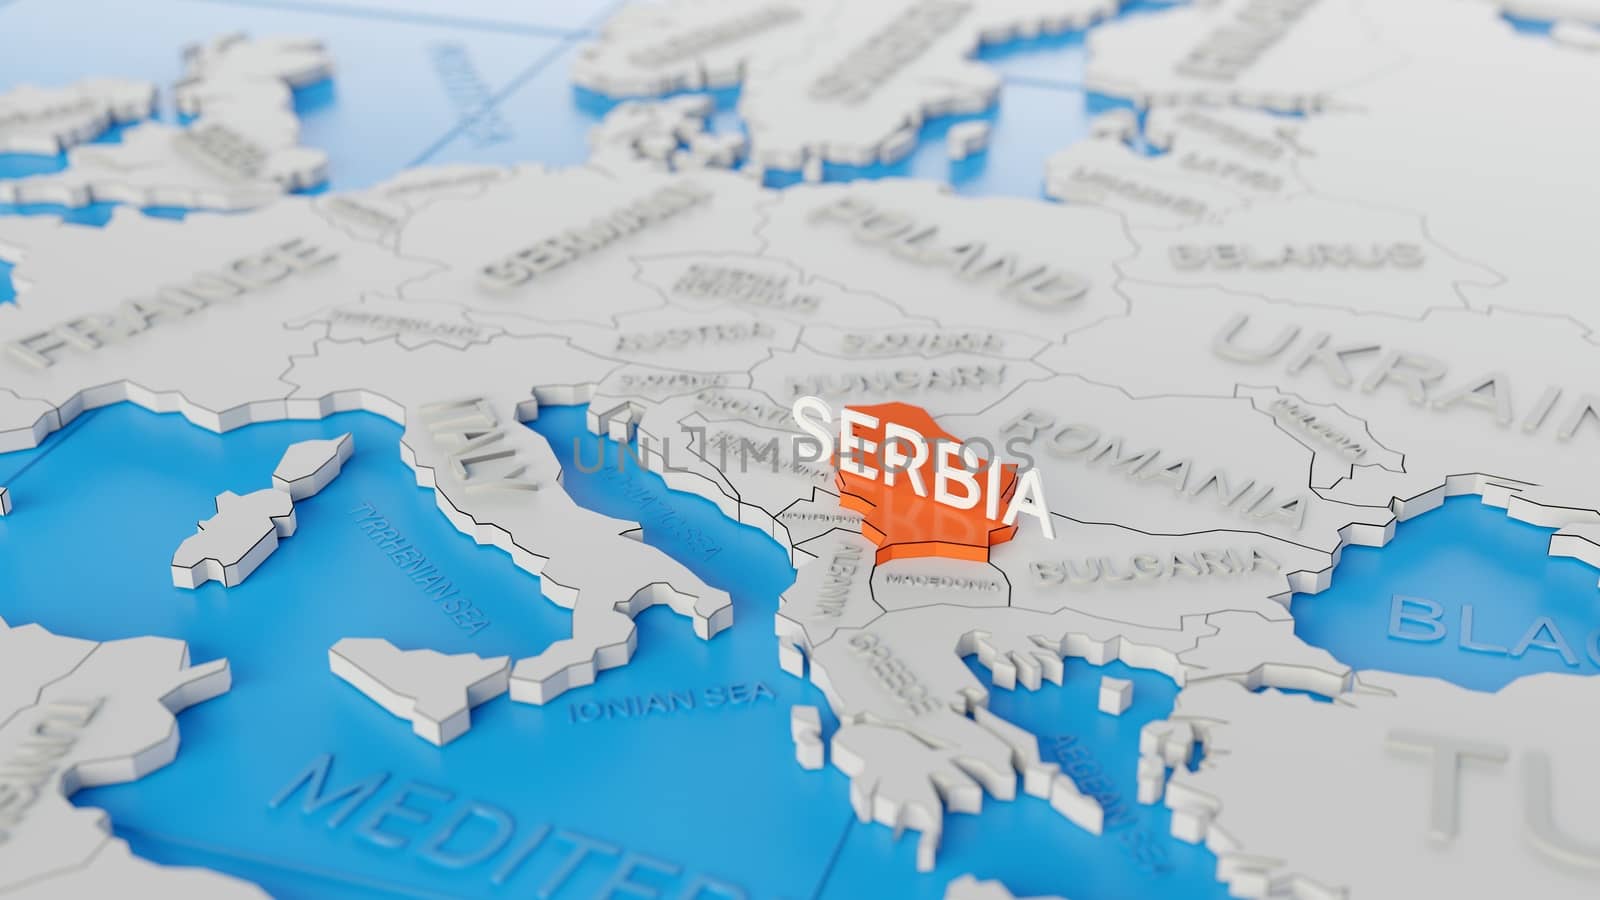 Serbia highlighted on a white simplified 3D world map. Digital 3D render.